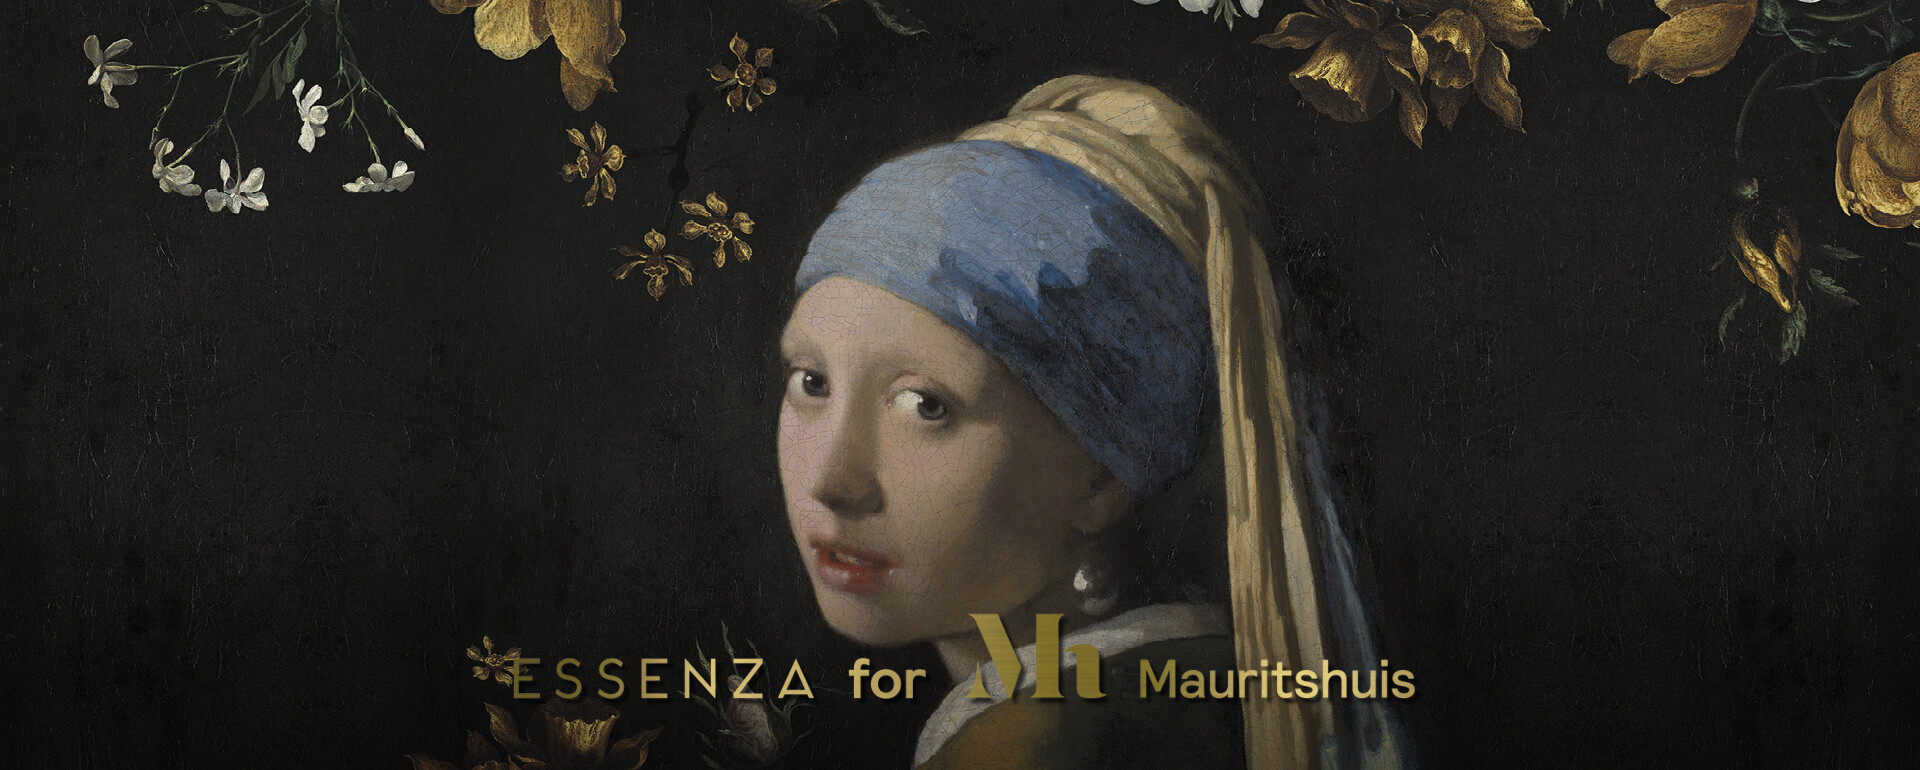 ESSENZA for Mauritshuis